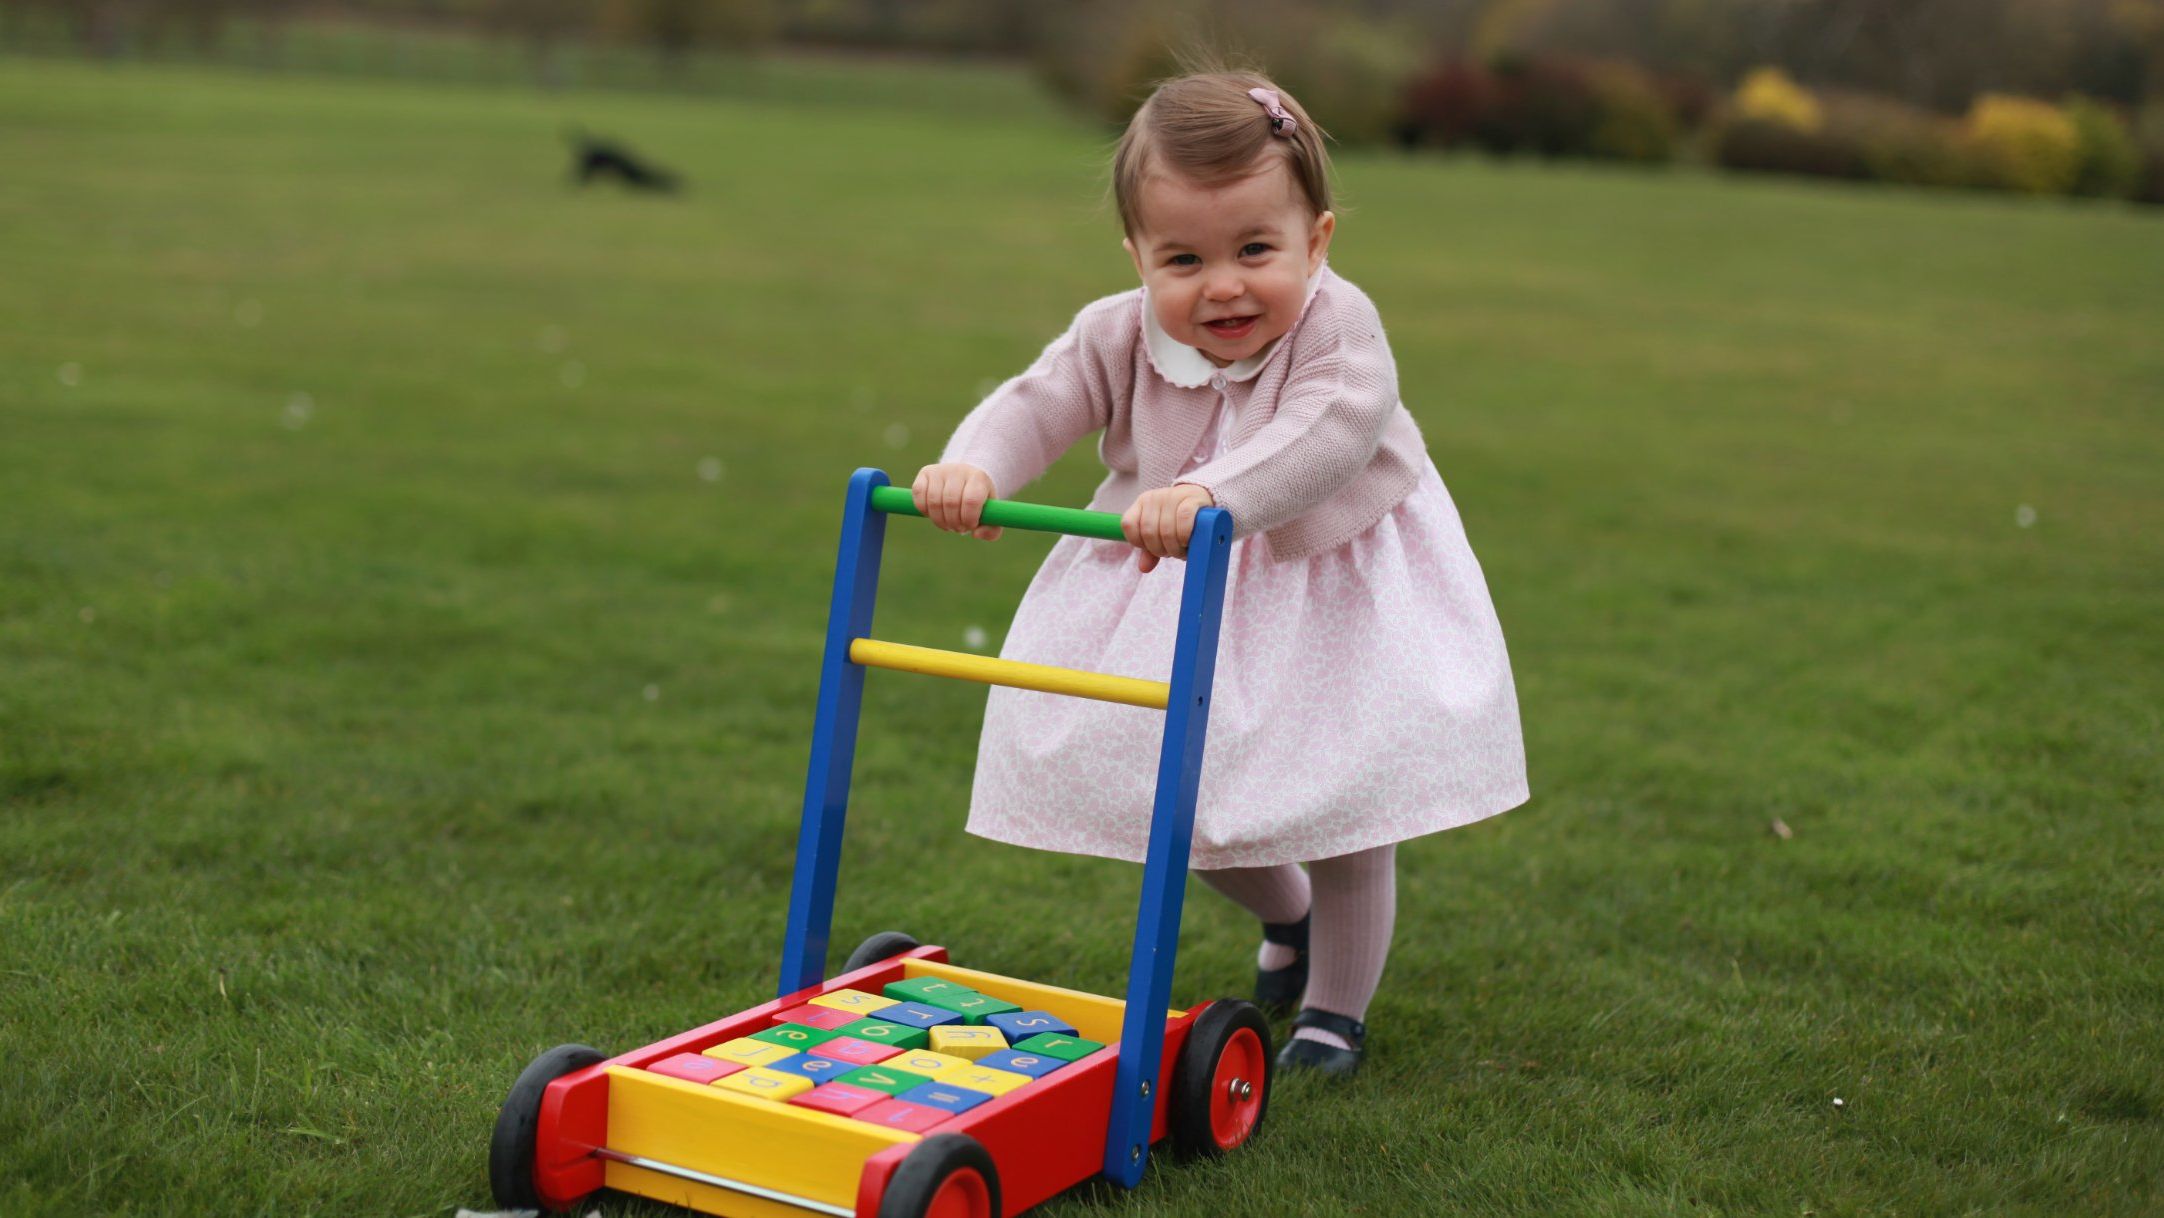 Kensington Palace released four photos of Princess Charlotte ahead of <a href="http://www.cnn.com/2016/05/01/europe/uk-princess-charlotte-photos/index.html" target="_blank">her first birthday</a> in May 2016.